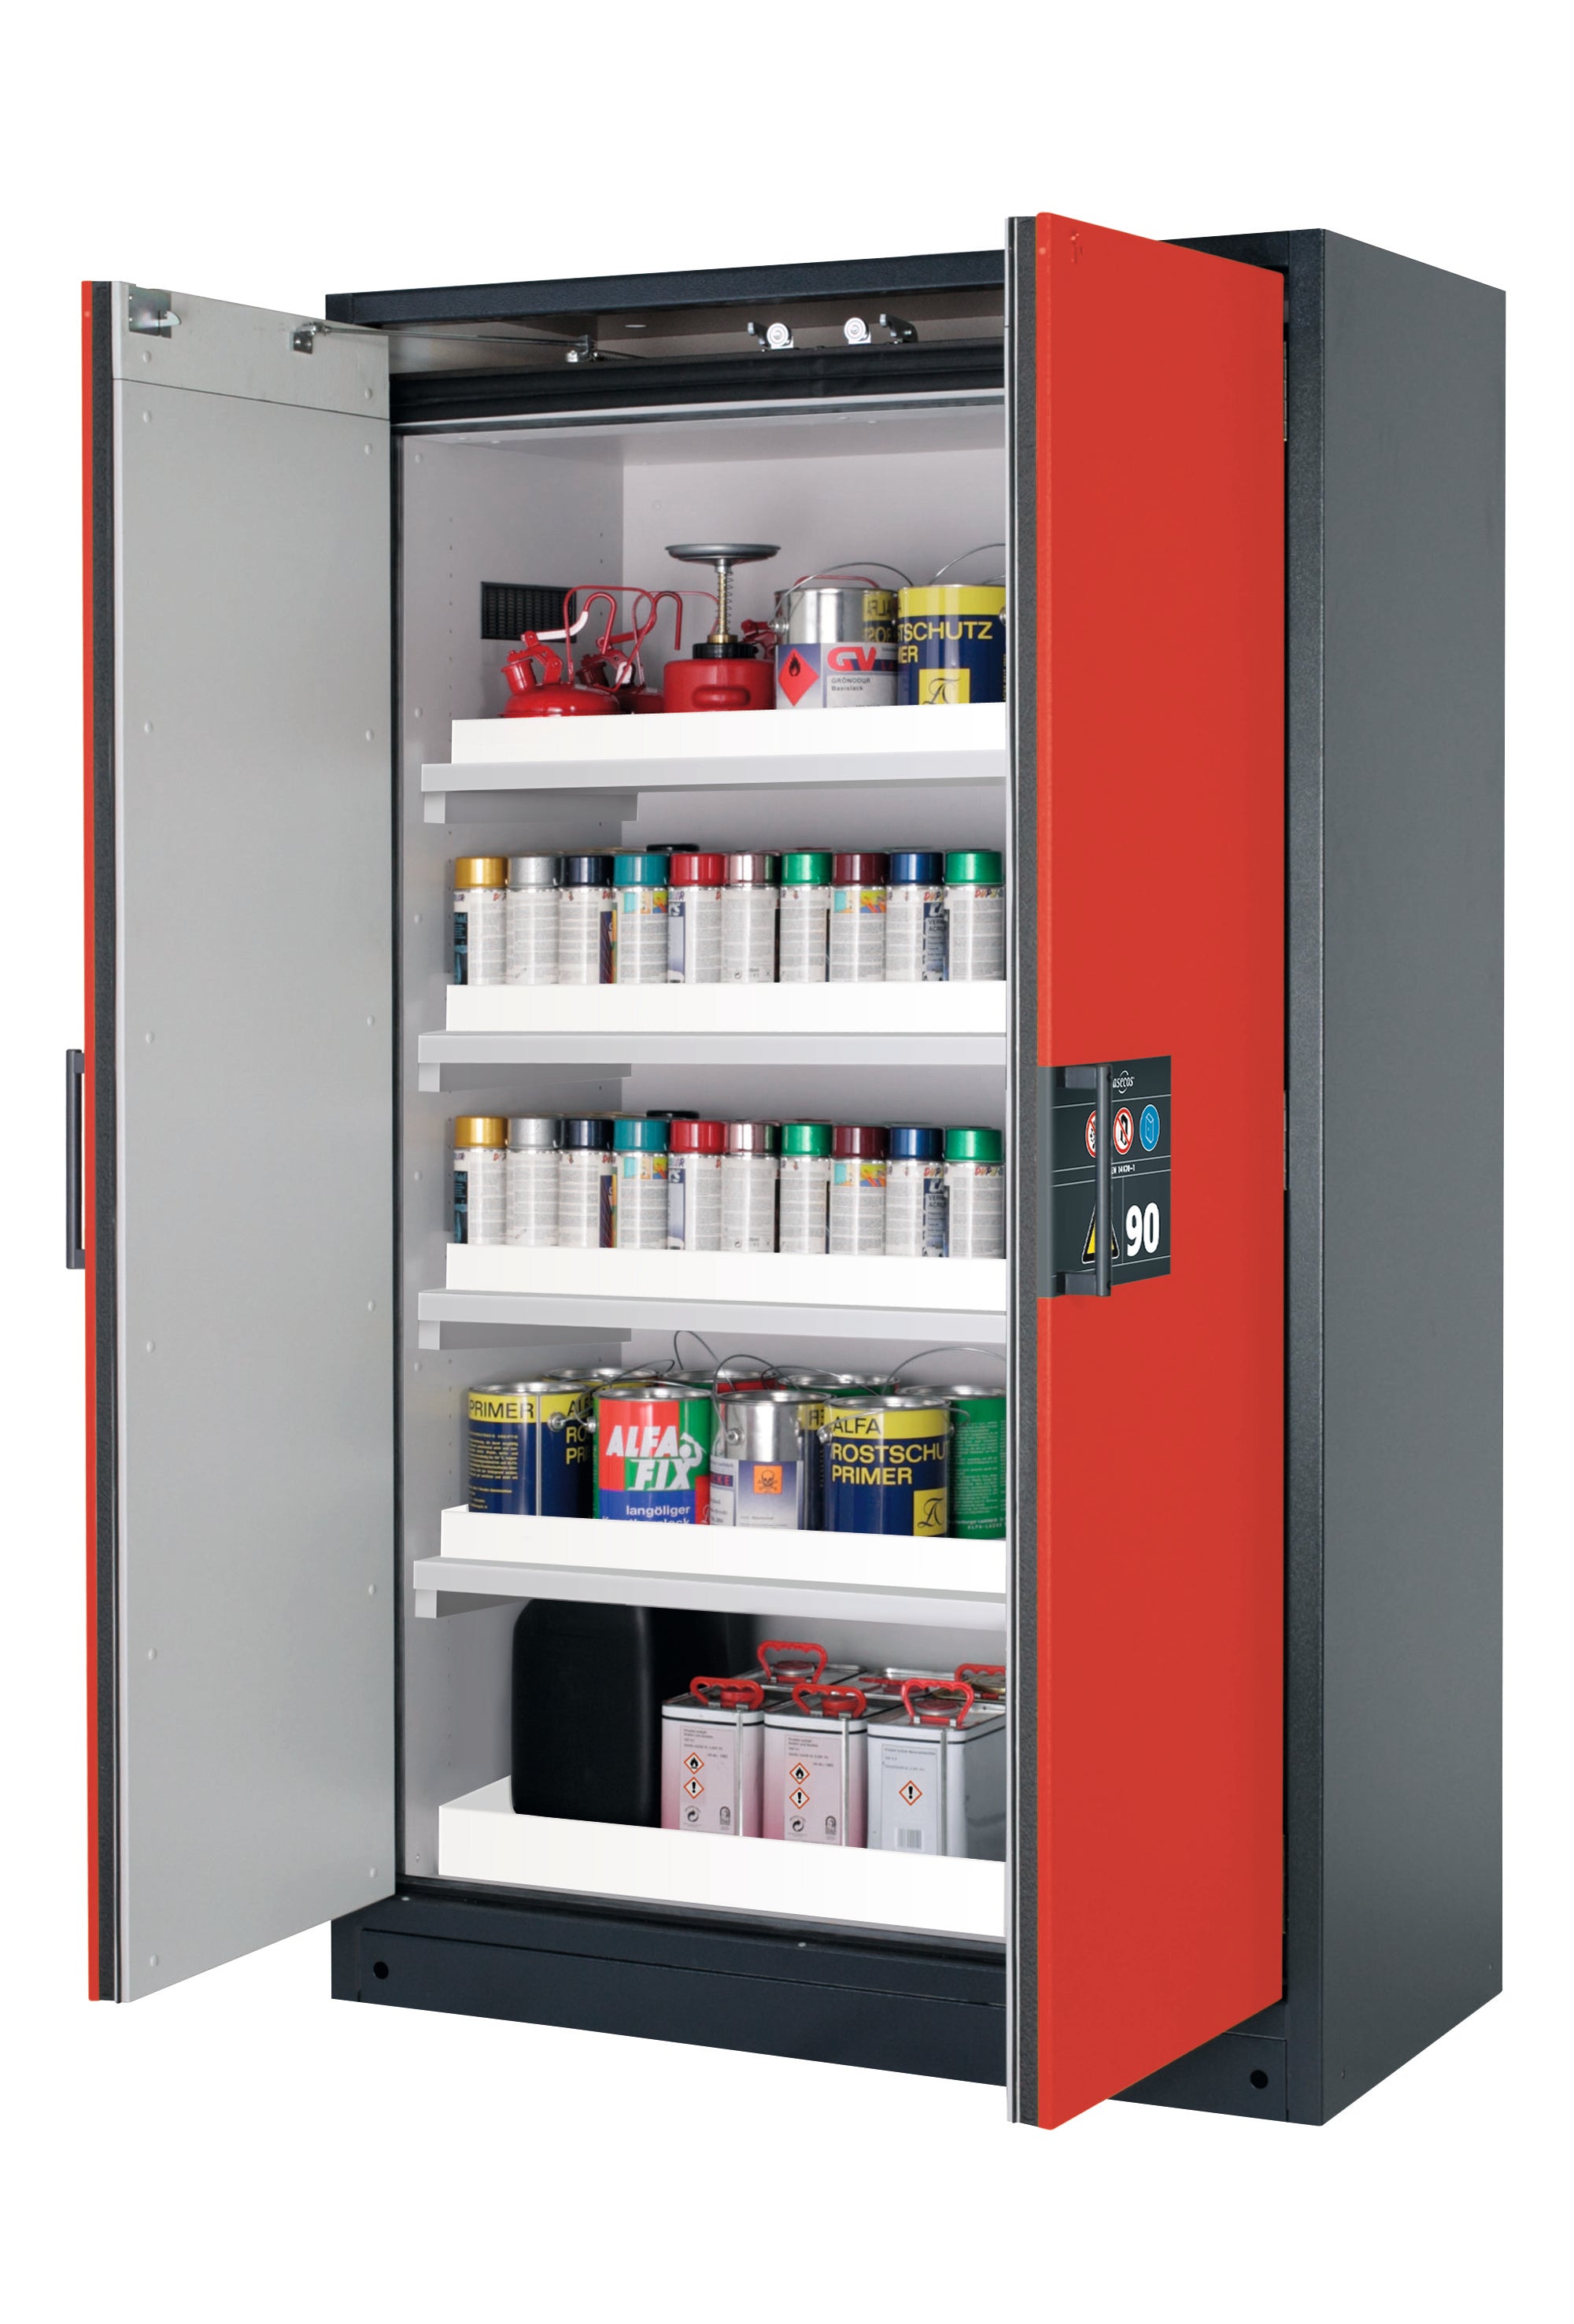 Type 90 safety storage cabinet Q-CLASSIC-90 model Q90.195.120 in traffic red RAL 3020 with 4x tray shelf (standard) (polypropylene),